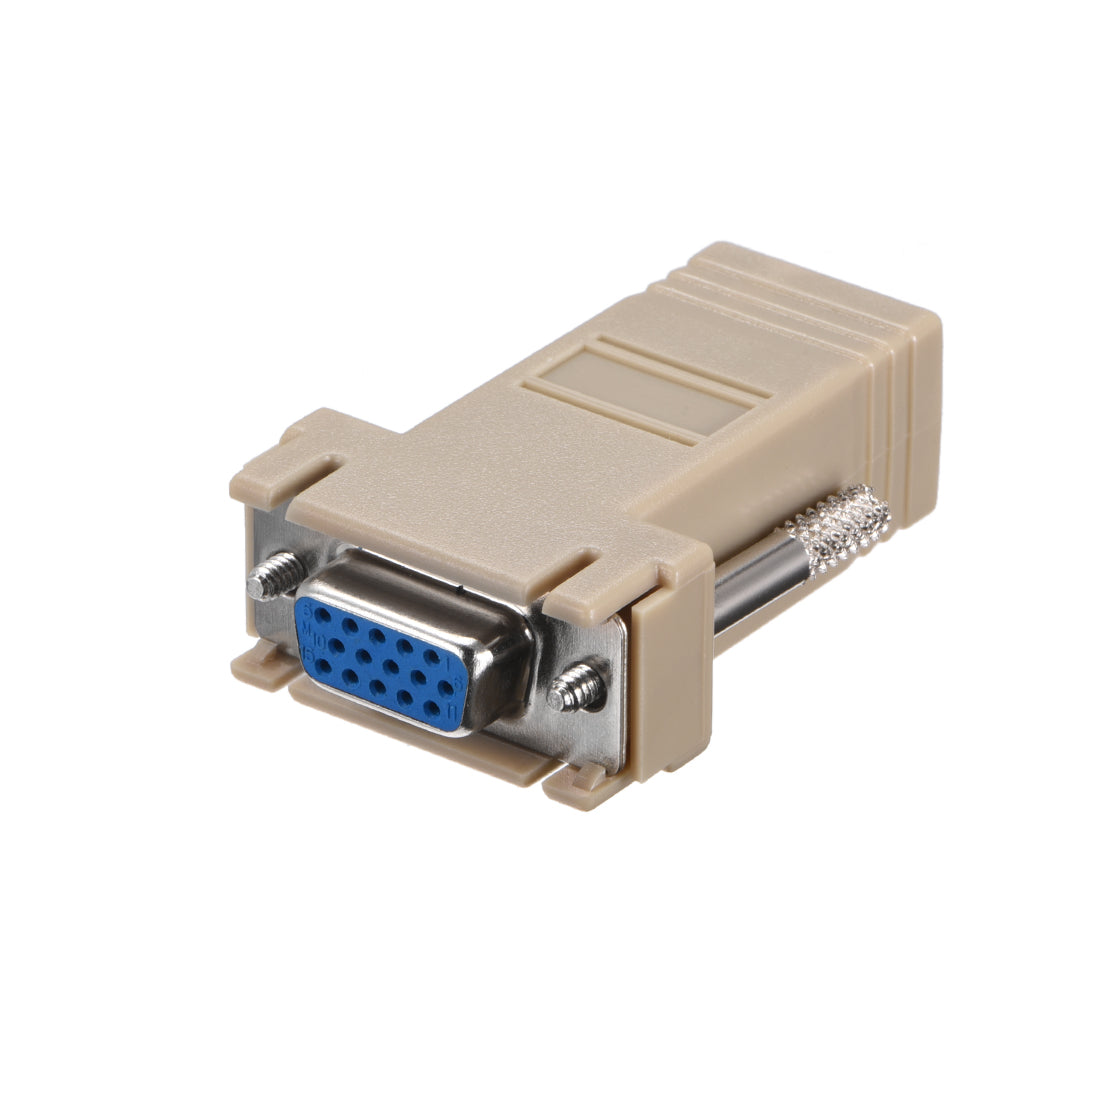 uxcell Uxcell VGA Extender to RJ45 Network Cable Adapter DB15 Female Port to RJ45 Female Enternet for Multimedia Video